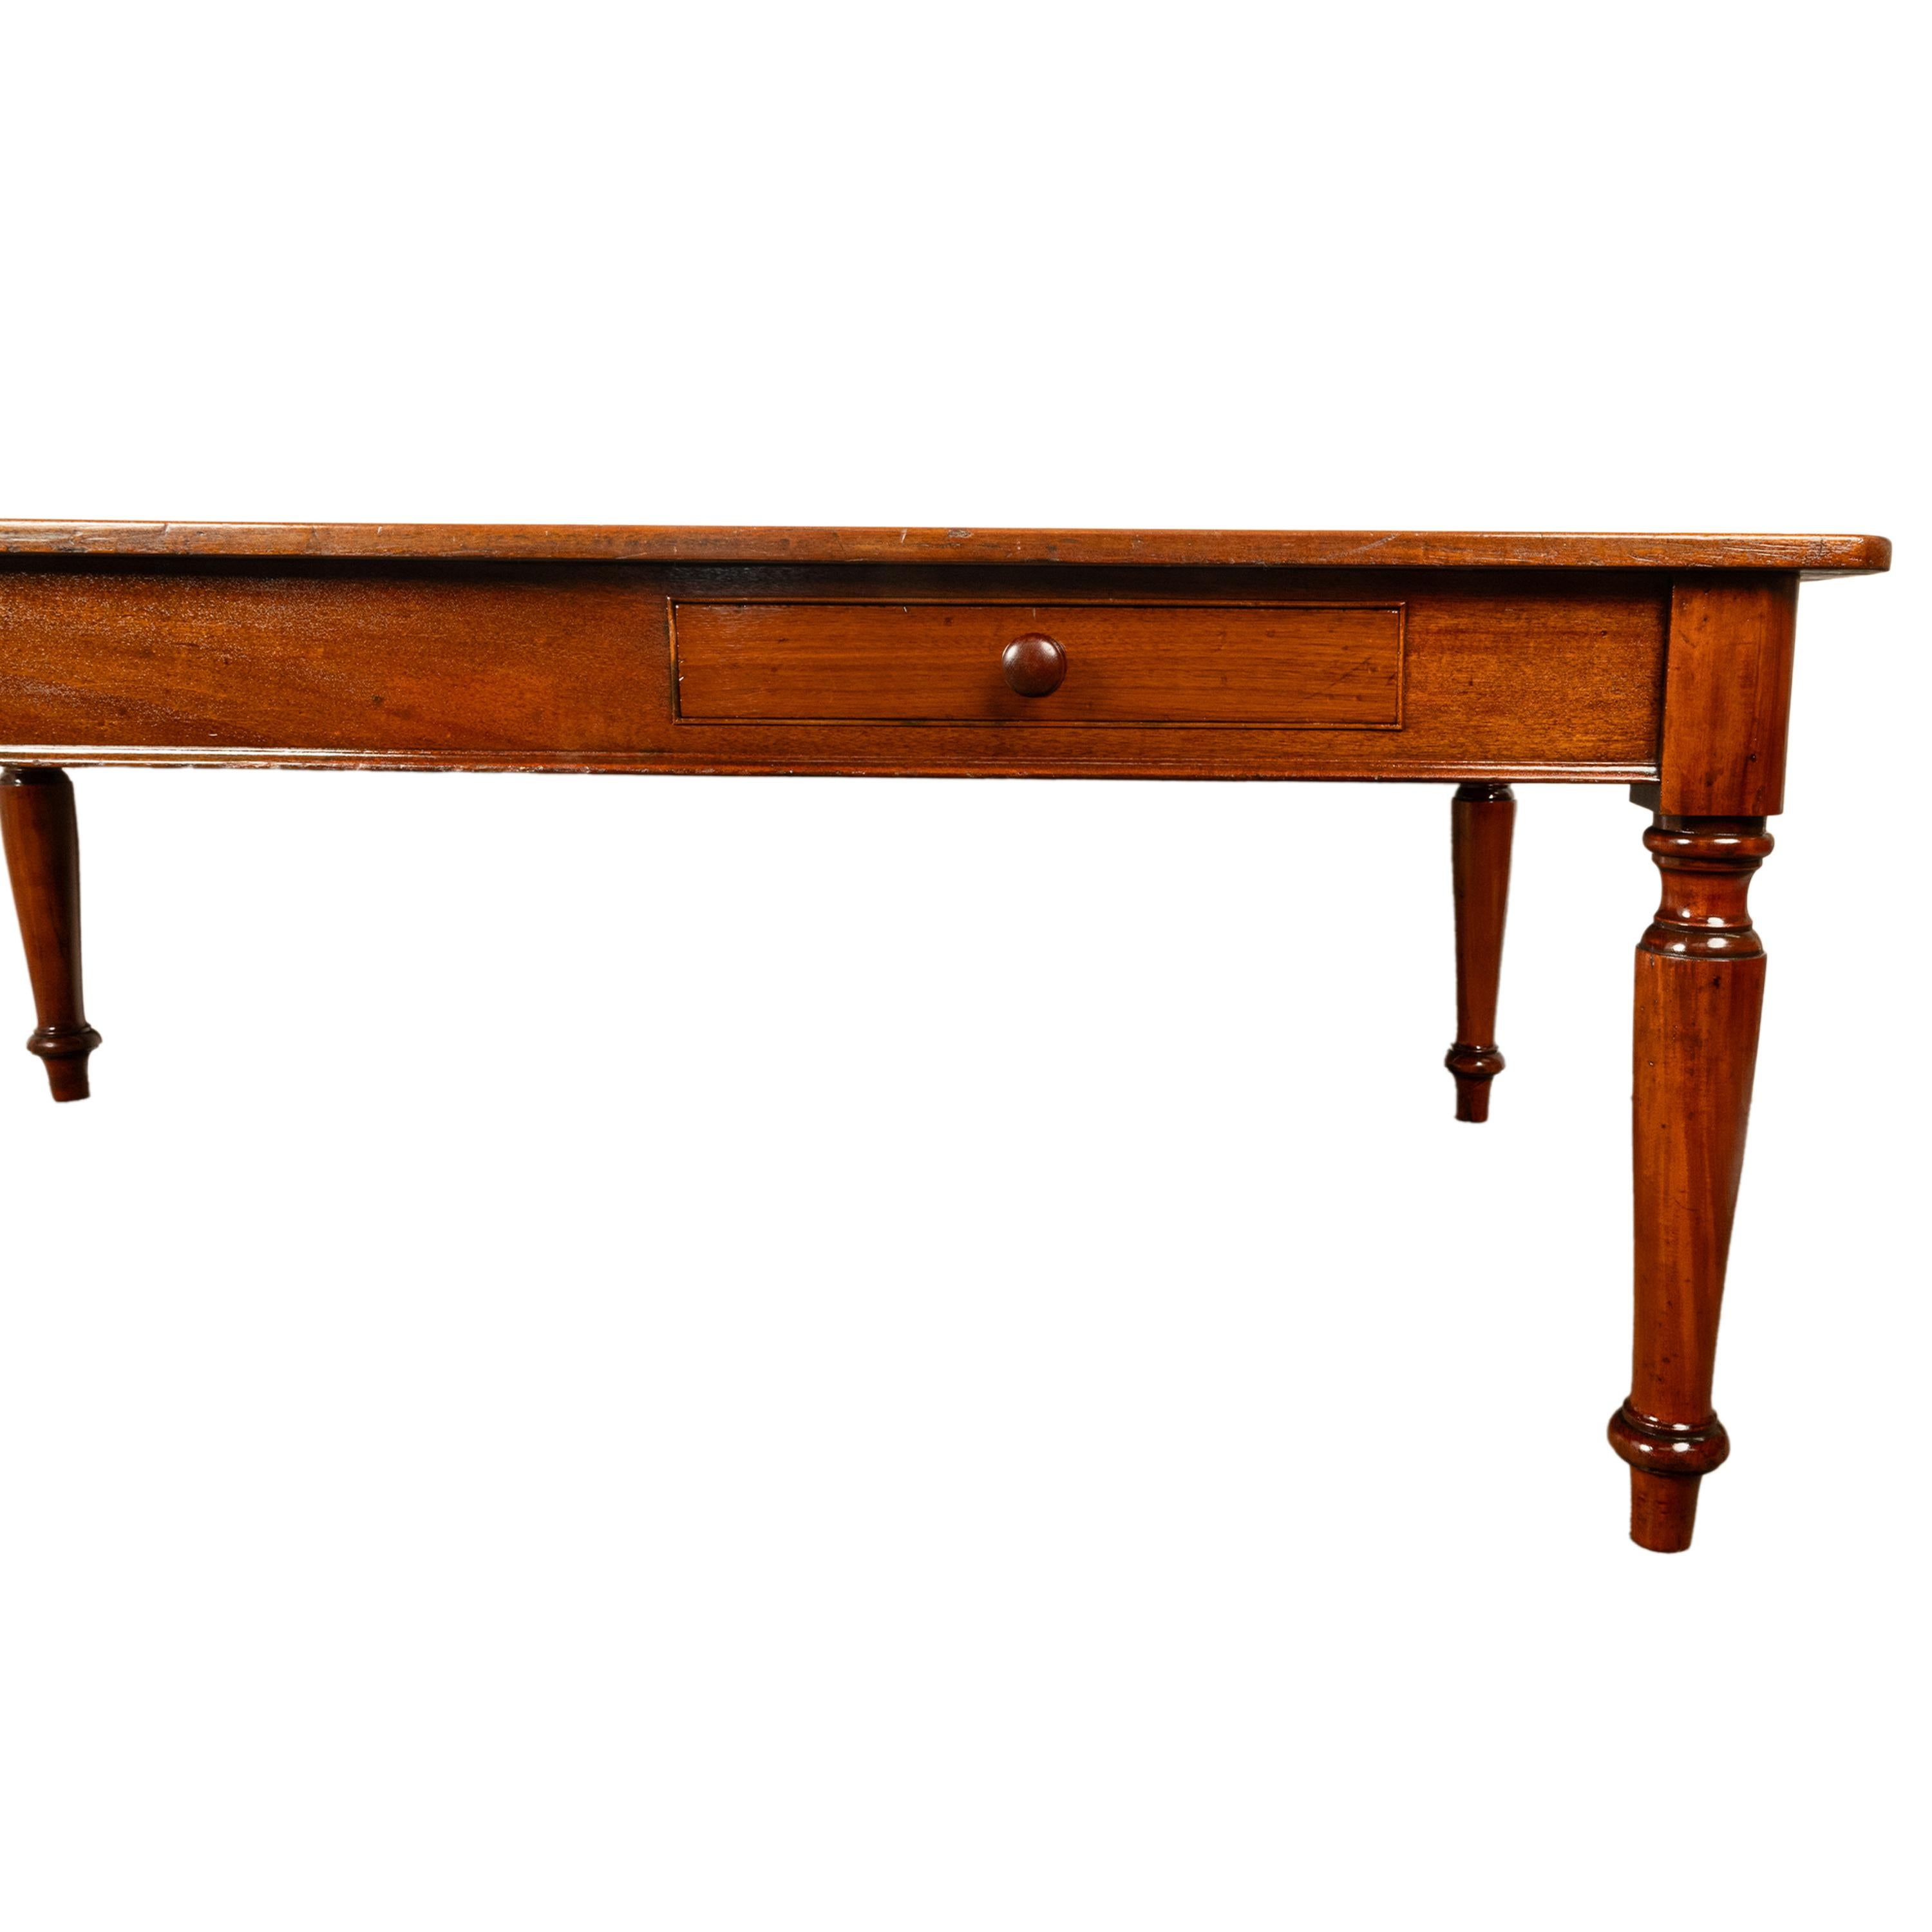 Antique Monumental 19th Century Mahogany Library Conference Dining Table 1860 For Sale 13